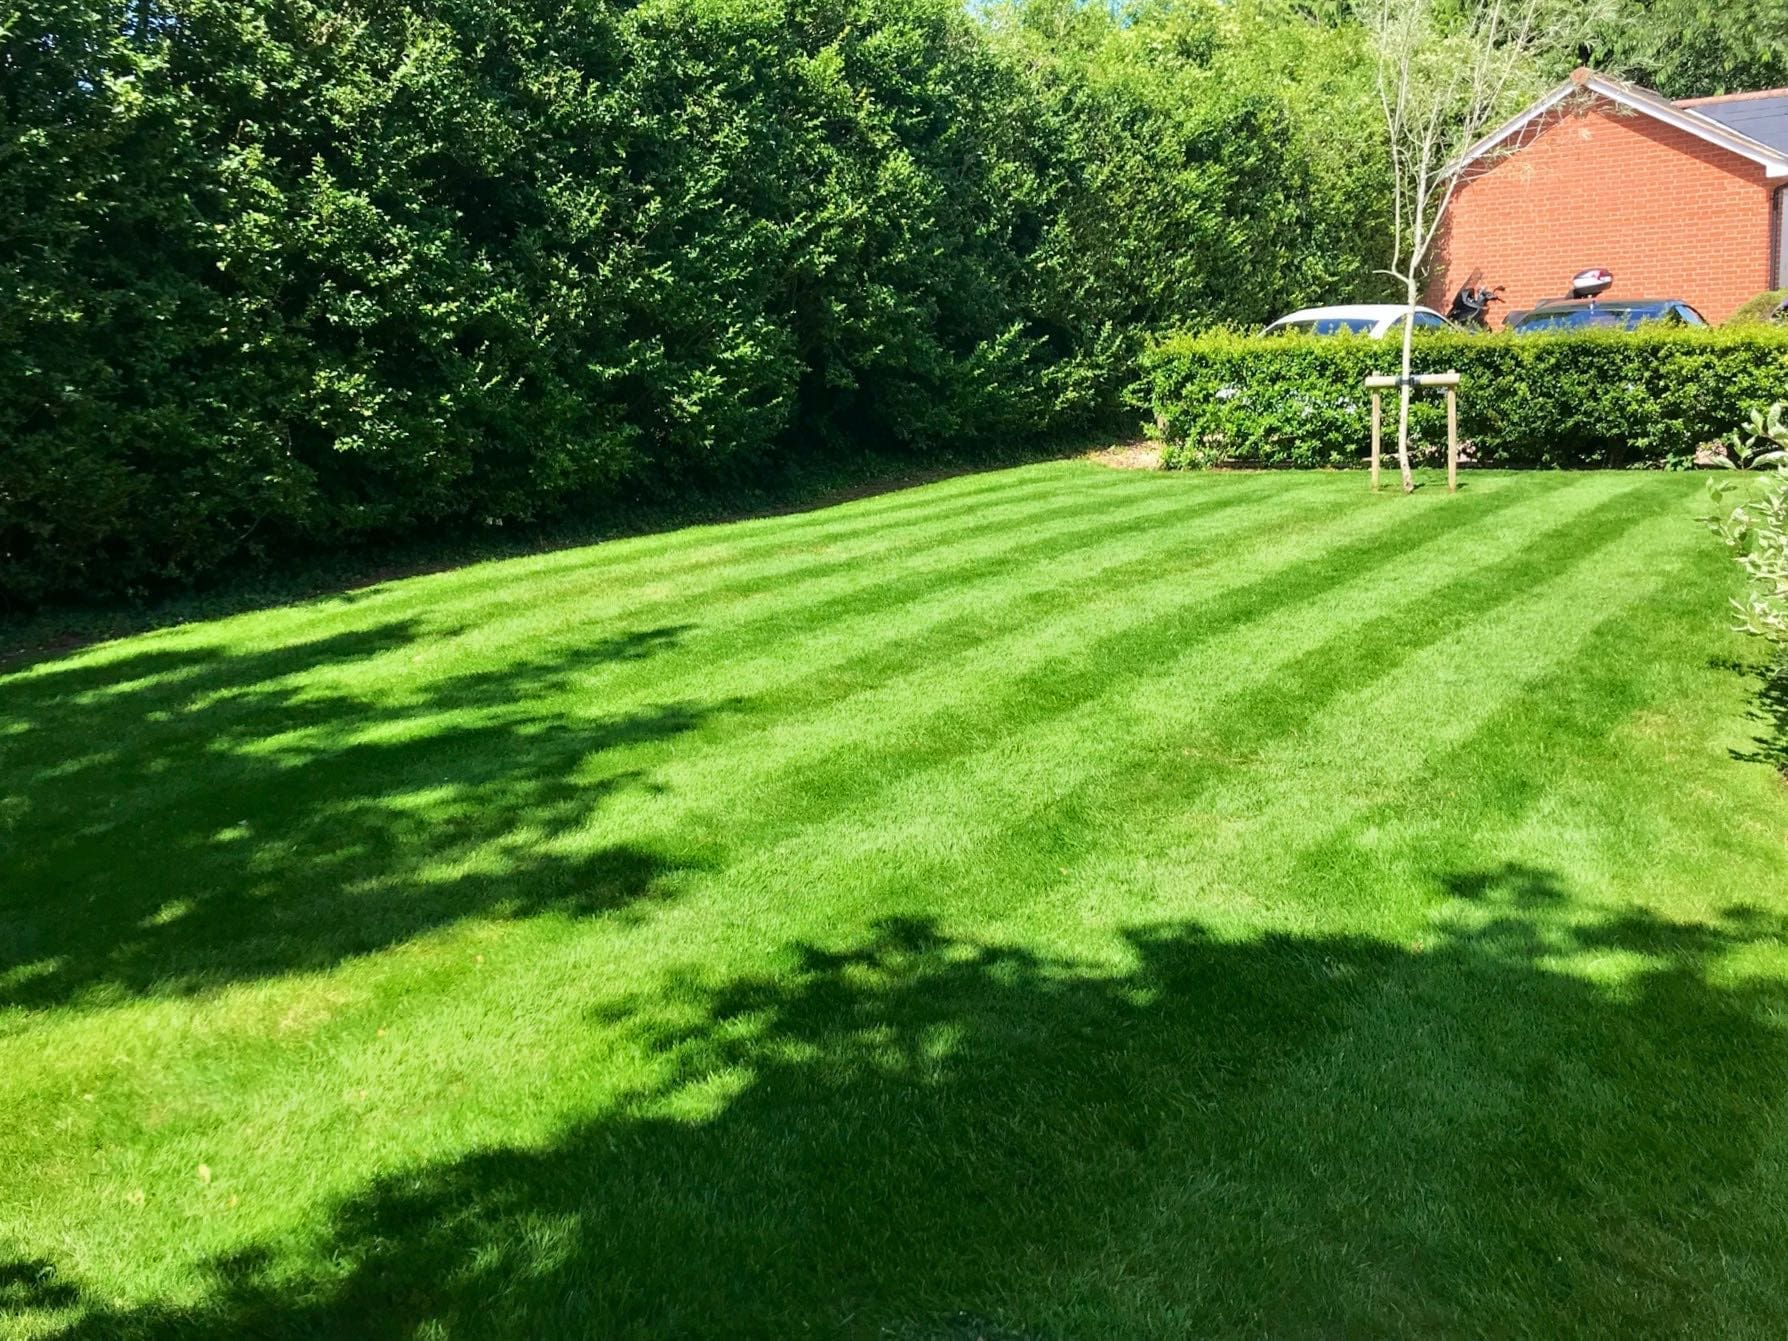 Bright green healthy lawn with stripes